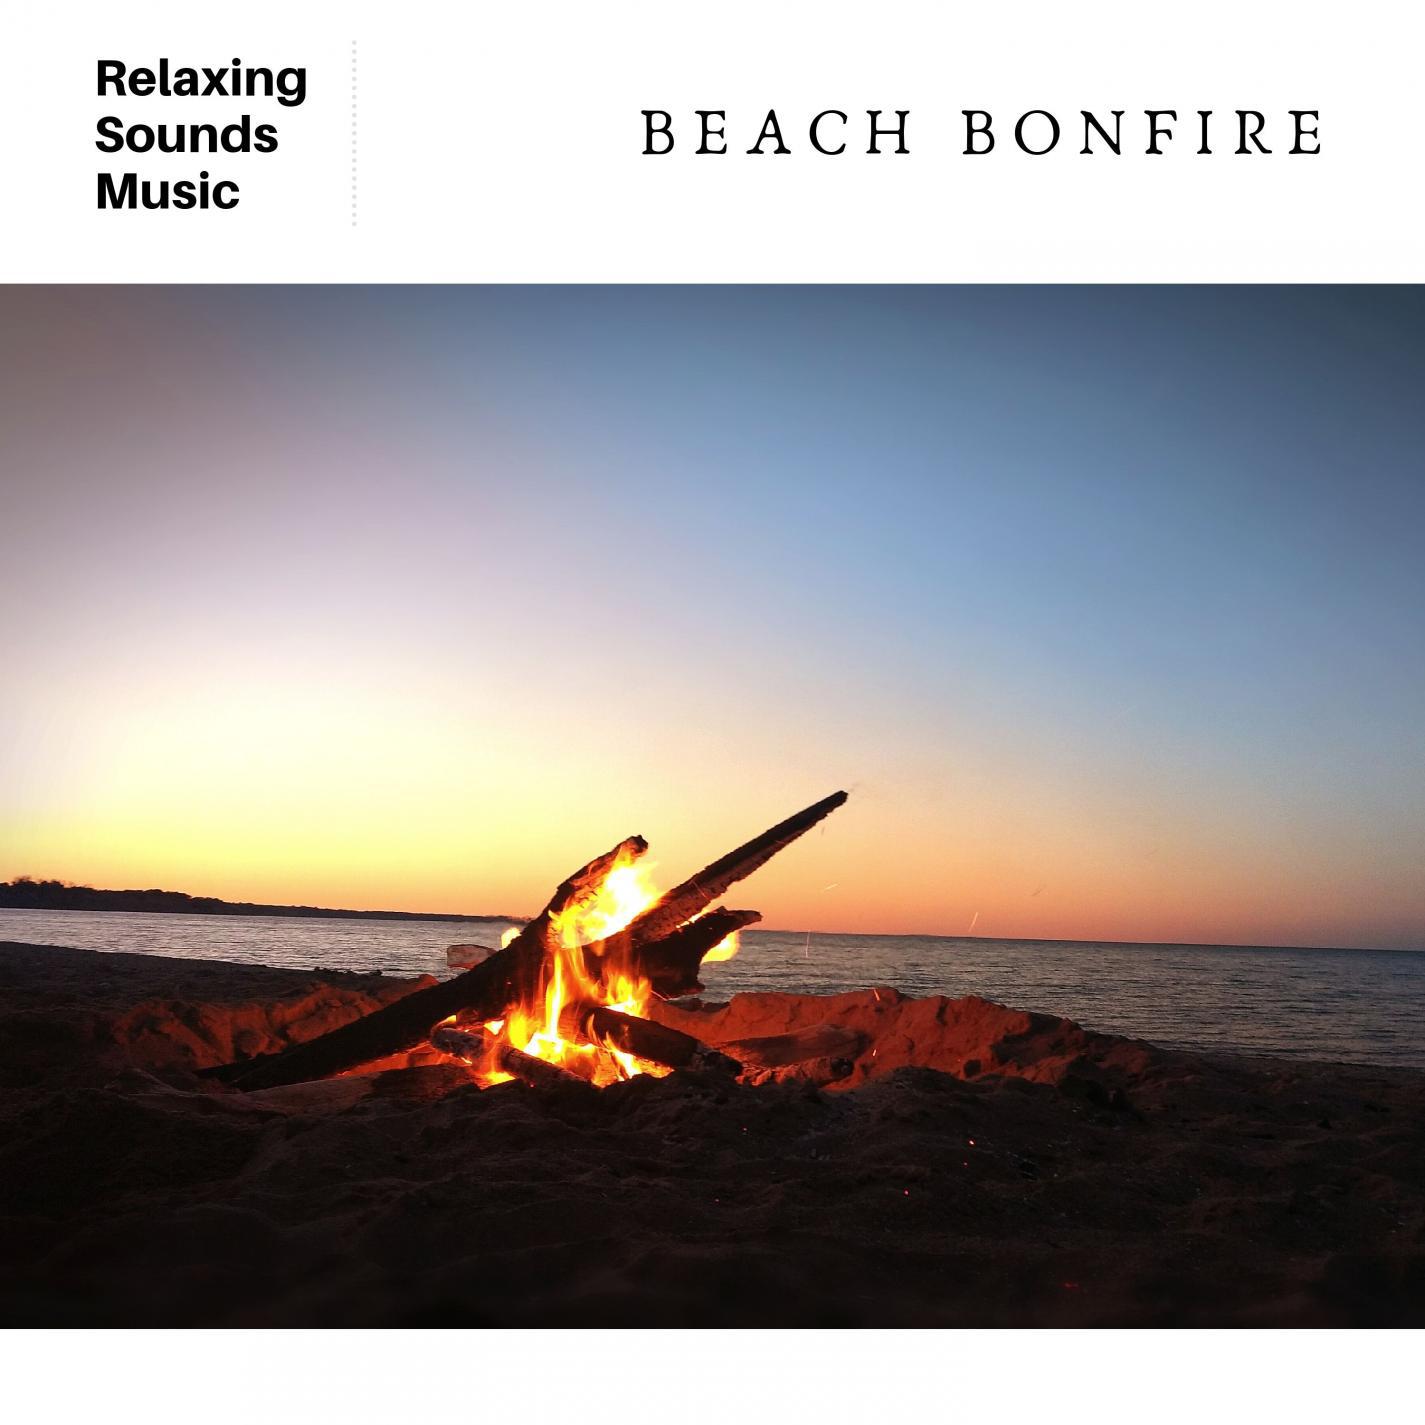 Beach Bonfire with Distant Sounds of Thunder